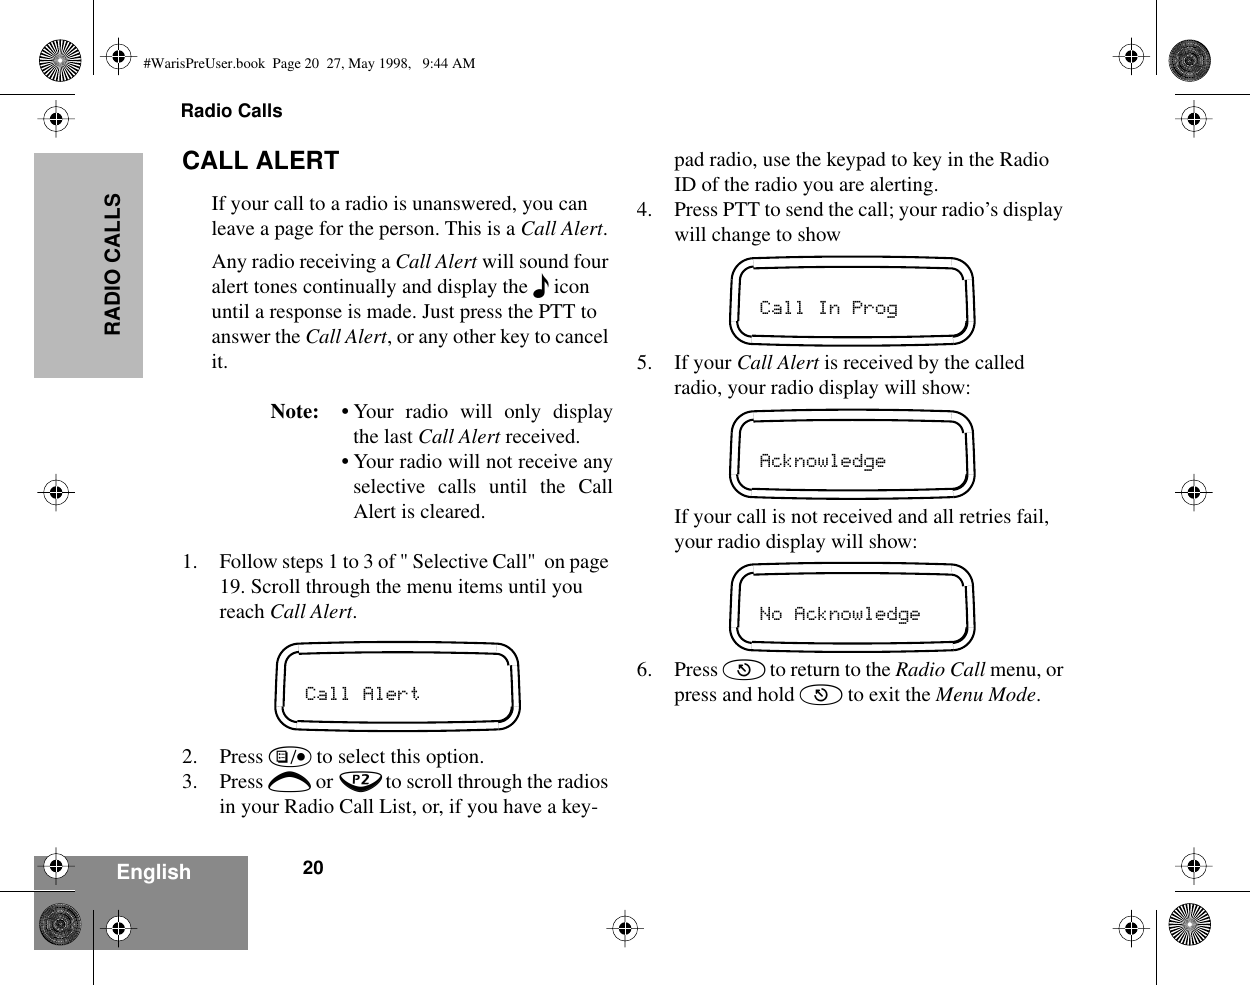 Radio Calls20EnglishRADIO CALLSCALL ALERTIf your call to a radio is unanswered, you can leave a page for the person. This is a Call Alert.Any radio receiving a Call Alert will sound four alert tones continually and display the F icon until a response is made. Just press the PTT to answer the Call Alert, or any other key to cancel it.Note: • Your radio will only displaythe last Call Alert received.•Your radio will not receive anyselective calls until the CallAlert is cleared.1. Follow steps 1 to 3 of &quot; Selective Call&quot;  on page 19. Scroll through the menu items until you reach Call Alert.2. Press ) to select this option.3. Press + or ? to scroll through the radios in your Radio Call List, or, if you have a key-pad radio, use the keypad to key in the Radio ID of the radio you are alerting.4. Press PTT to send the call; your radio’s display will change to show5. If your Call Alert is received by the called radio, your radio display will show:If your call is not received and all retries fail, your radio display will show:6. Press ( to return to the Radio Call menu, or press and hold ( to exit the Menu Mode.Call AlertCall In ProgAcknowledgeNo Acknowledge#WarisPreUser.book  Page 20  27, May 1998,   9:44 AM